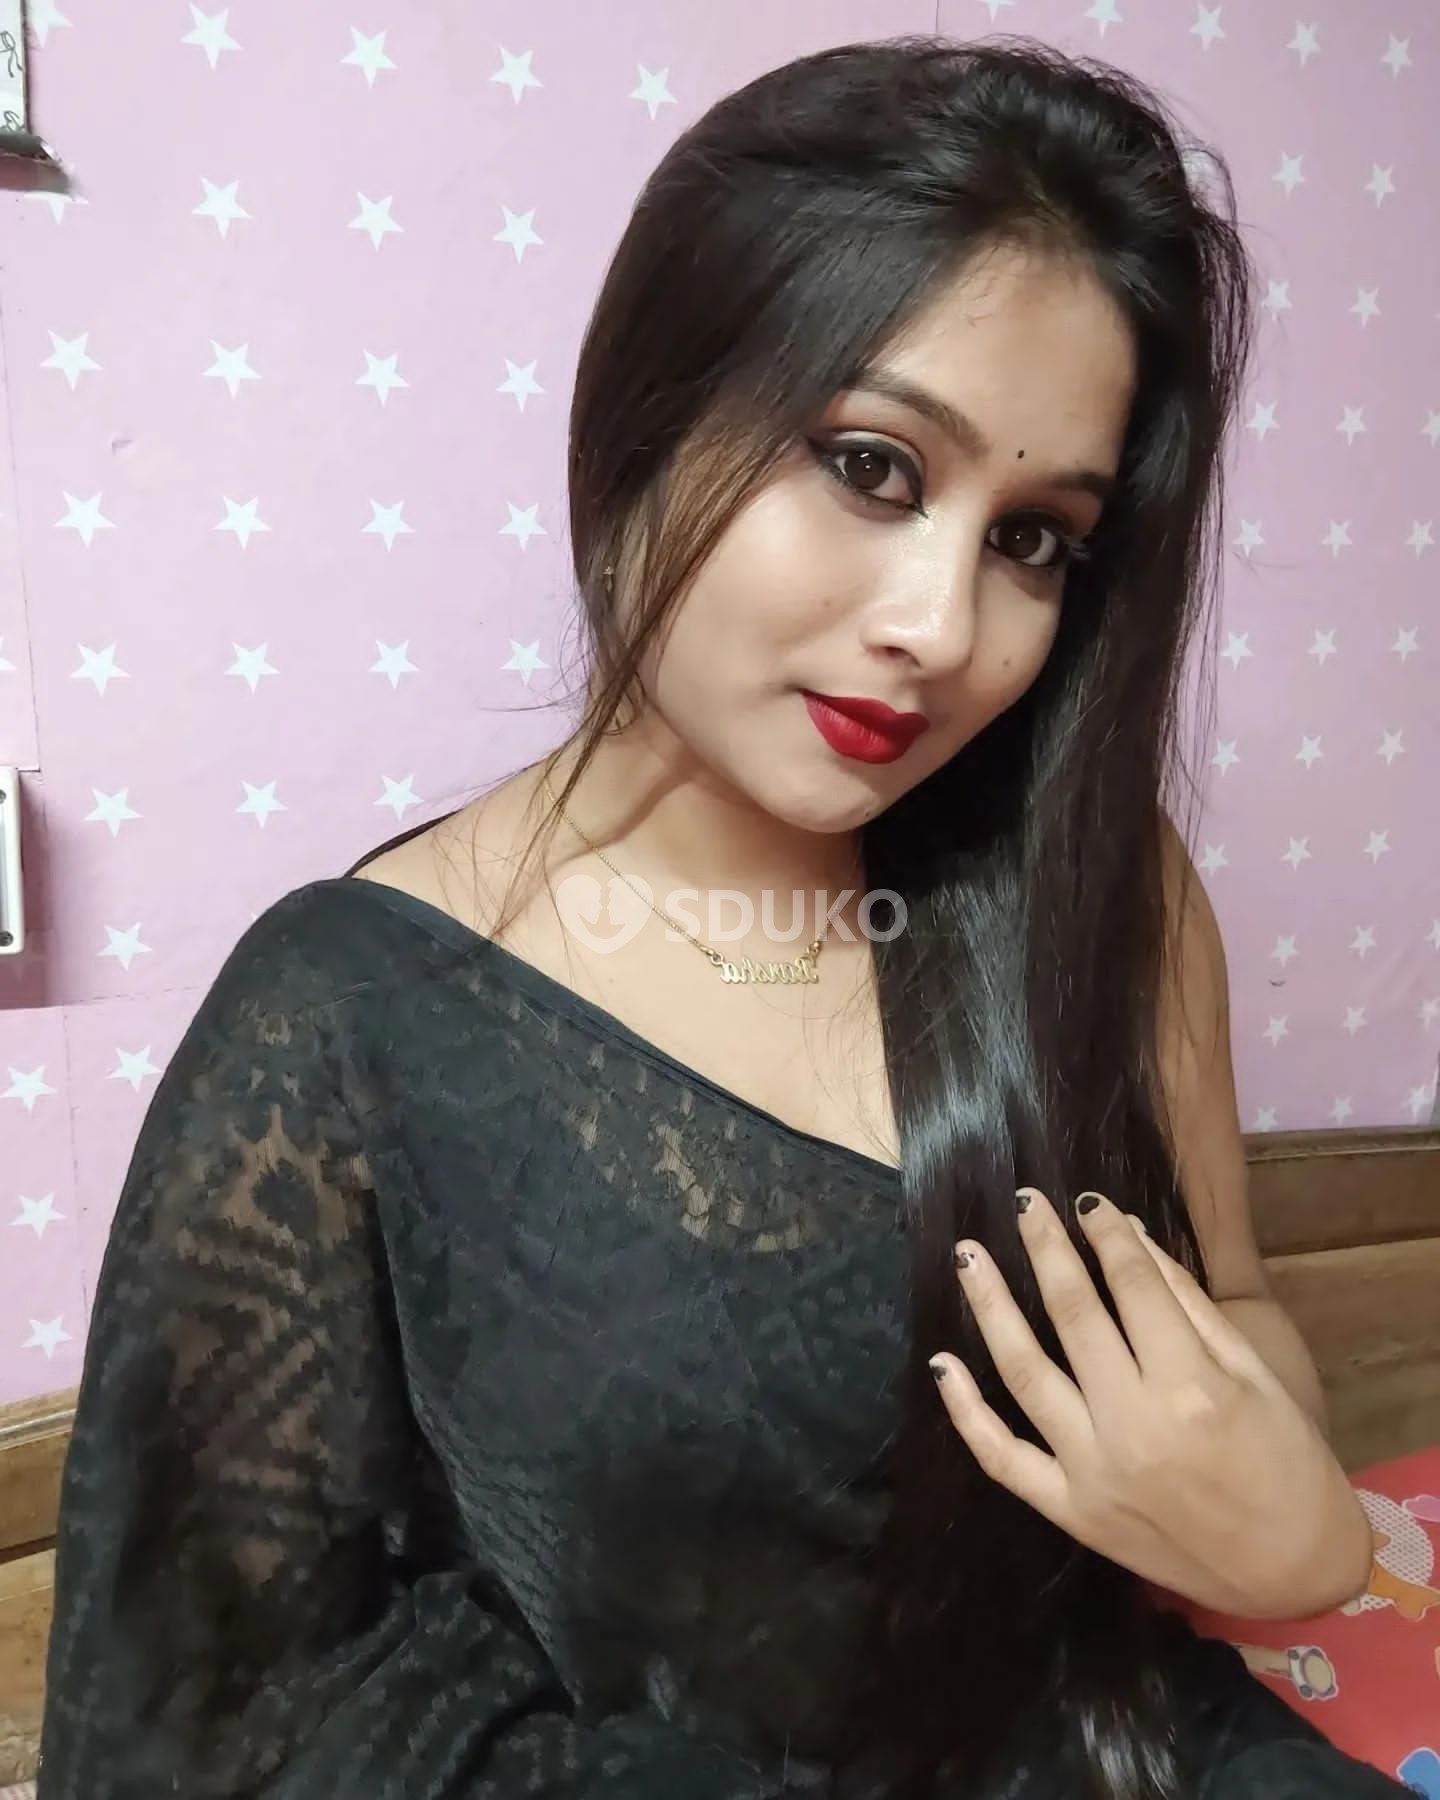 Aligarh %🆑 TODAY LOW PRICE 100% SAFE AND SECURE GENUINE CALL GIRL AFFORDABLE PRICE CALL NOW